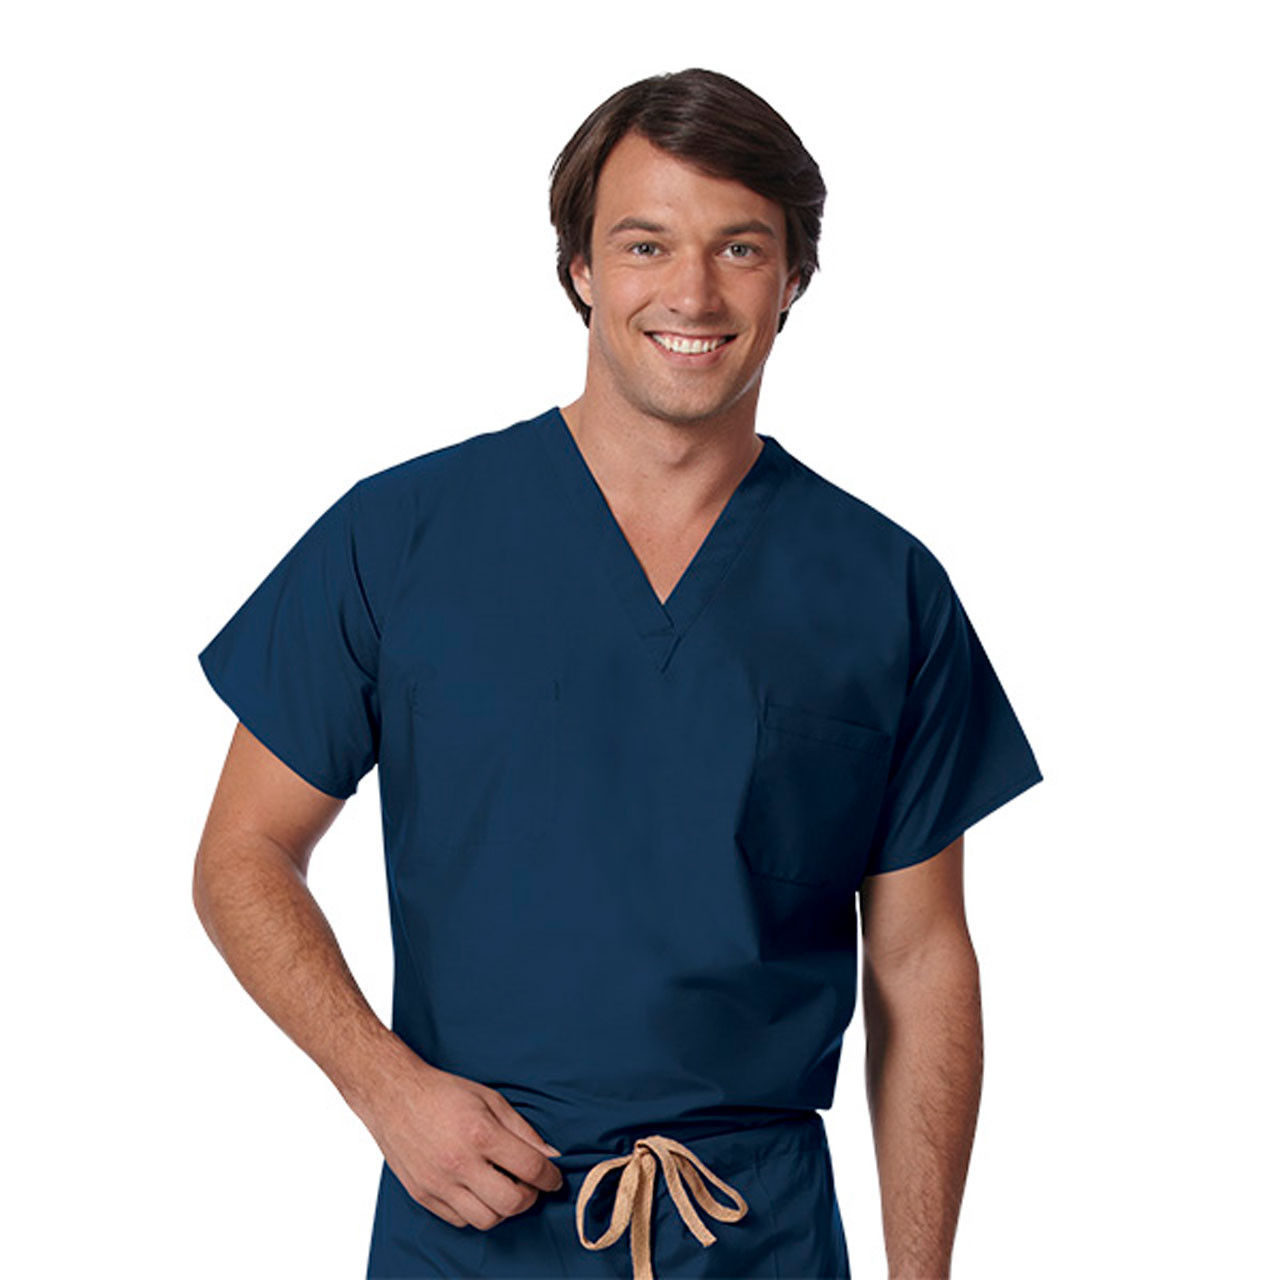 Are these navy surgical scrubs suitable for both genders?